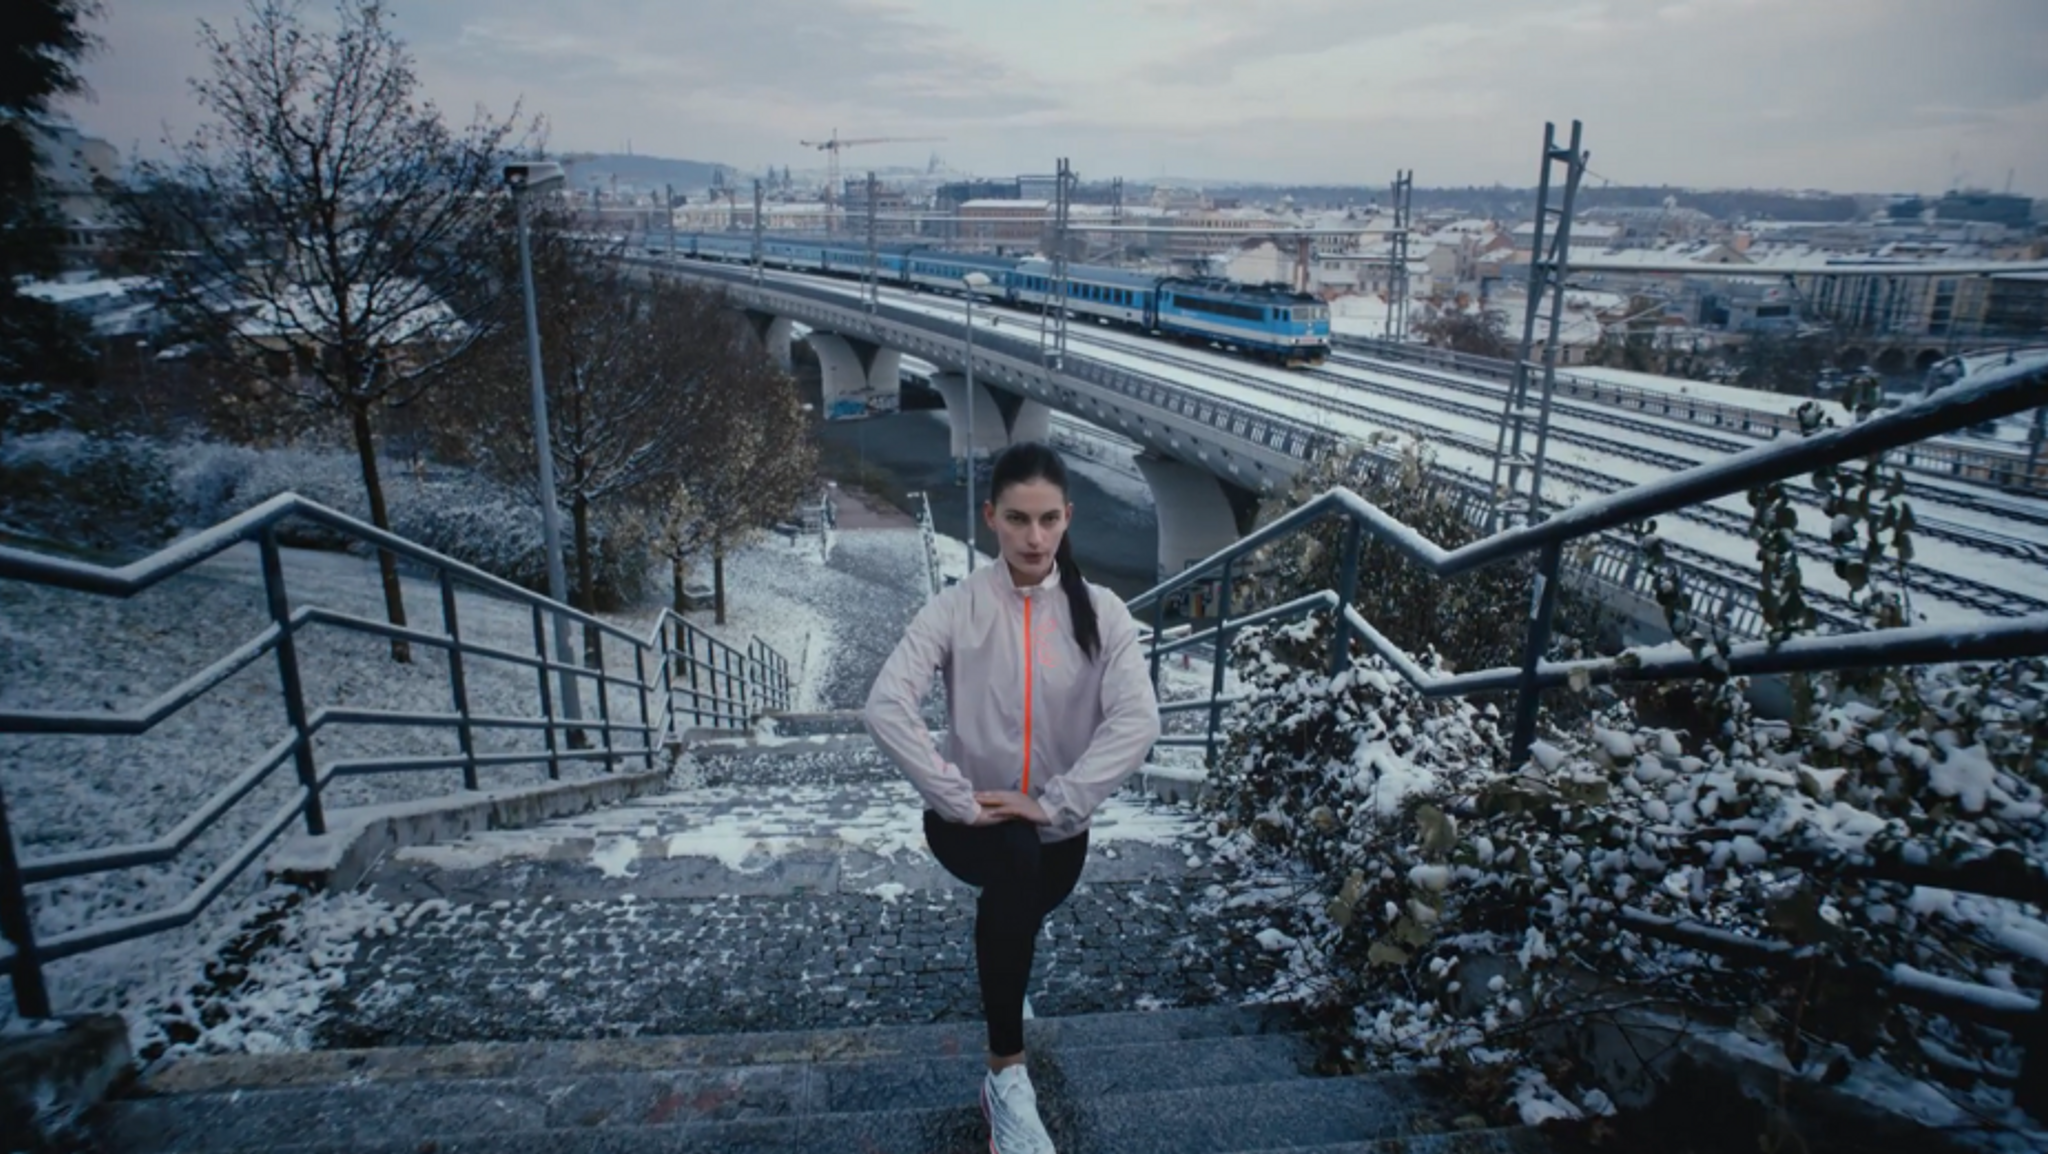 New Balance aims to inspire everyone to run 